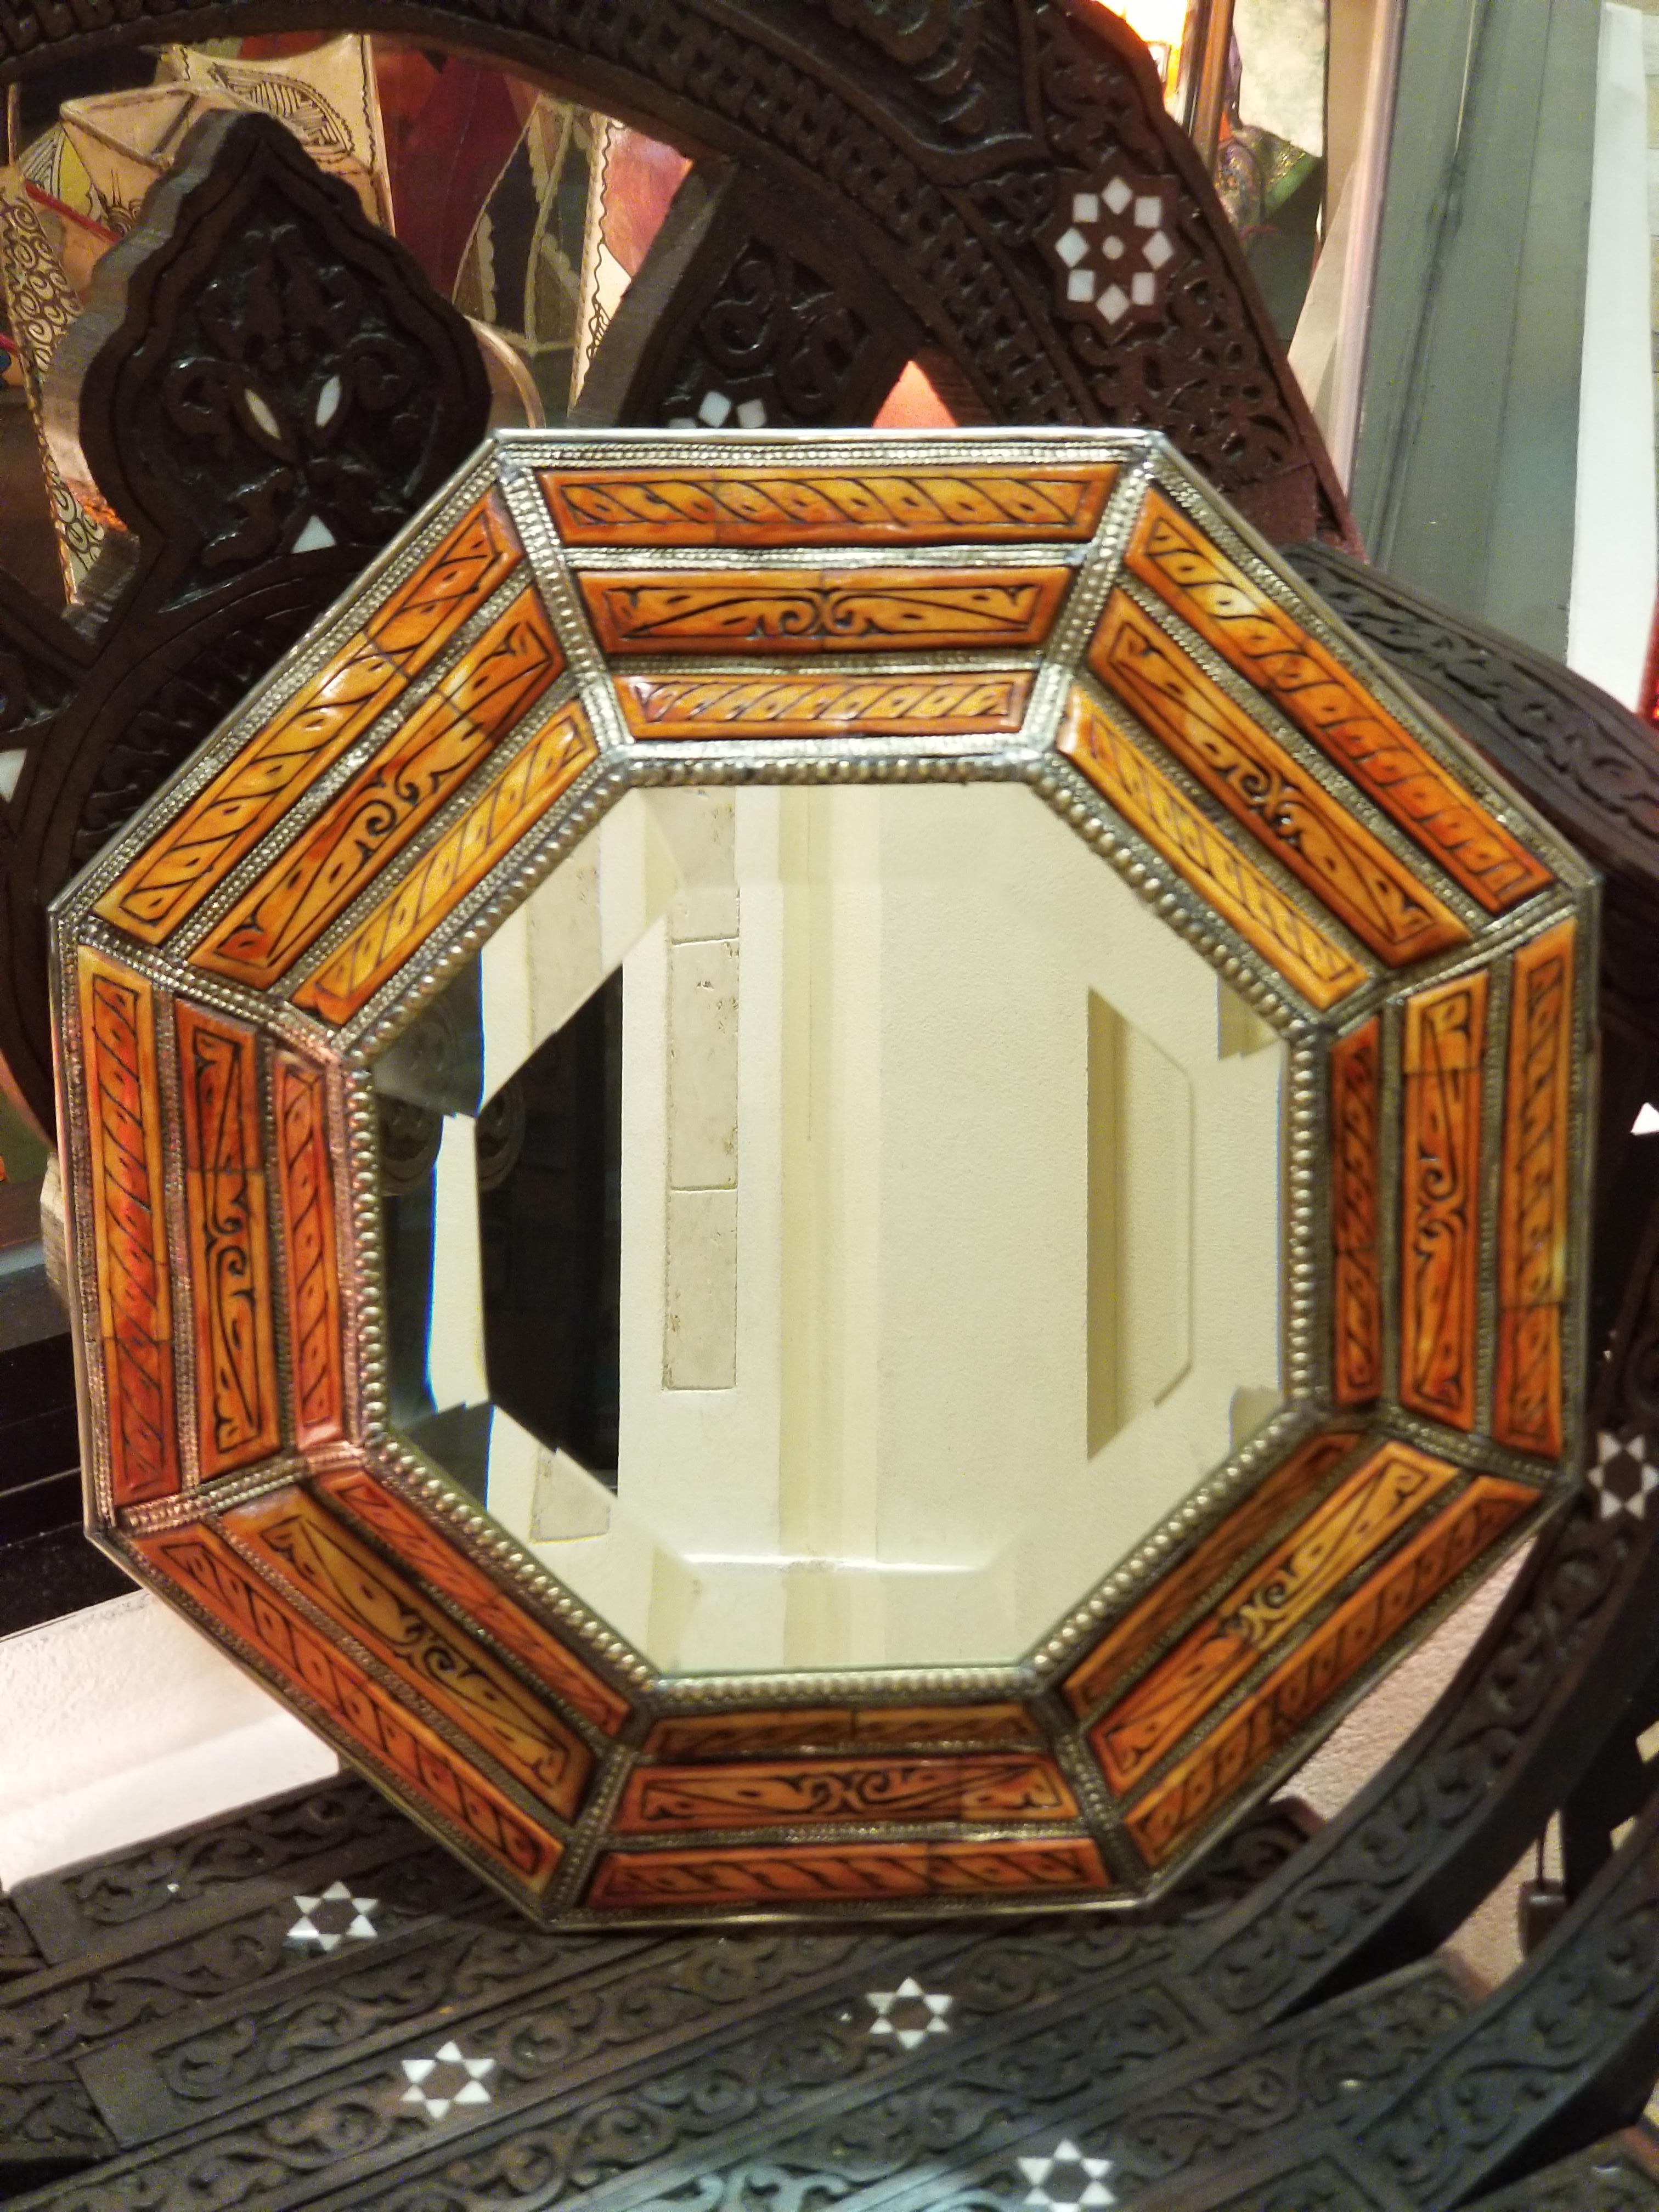 Medium size metal inlaid and camel bone Moroccan mirror. Made in the city of Marrakech. Hexagonal shape measuring approximately 15